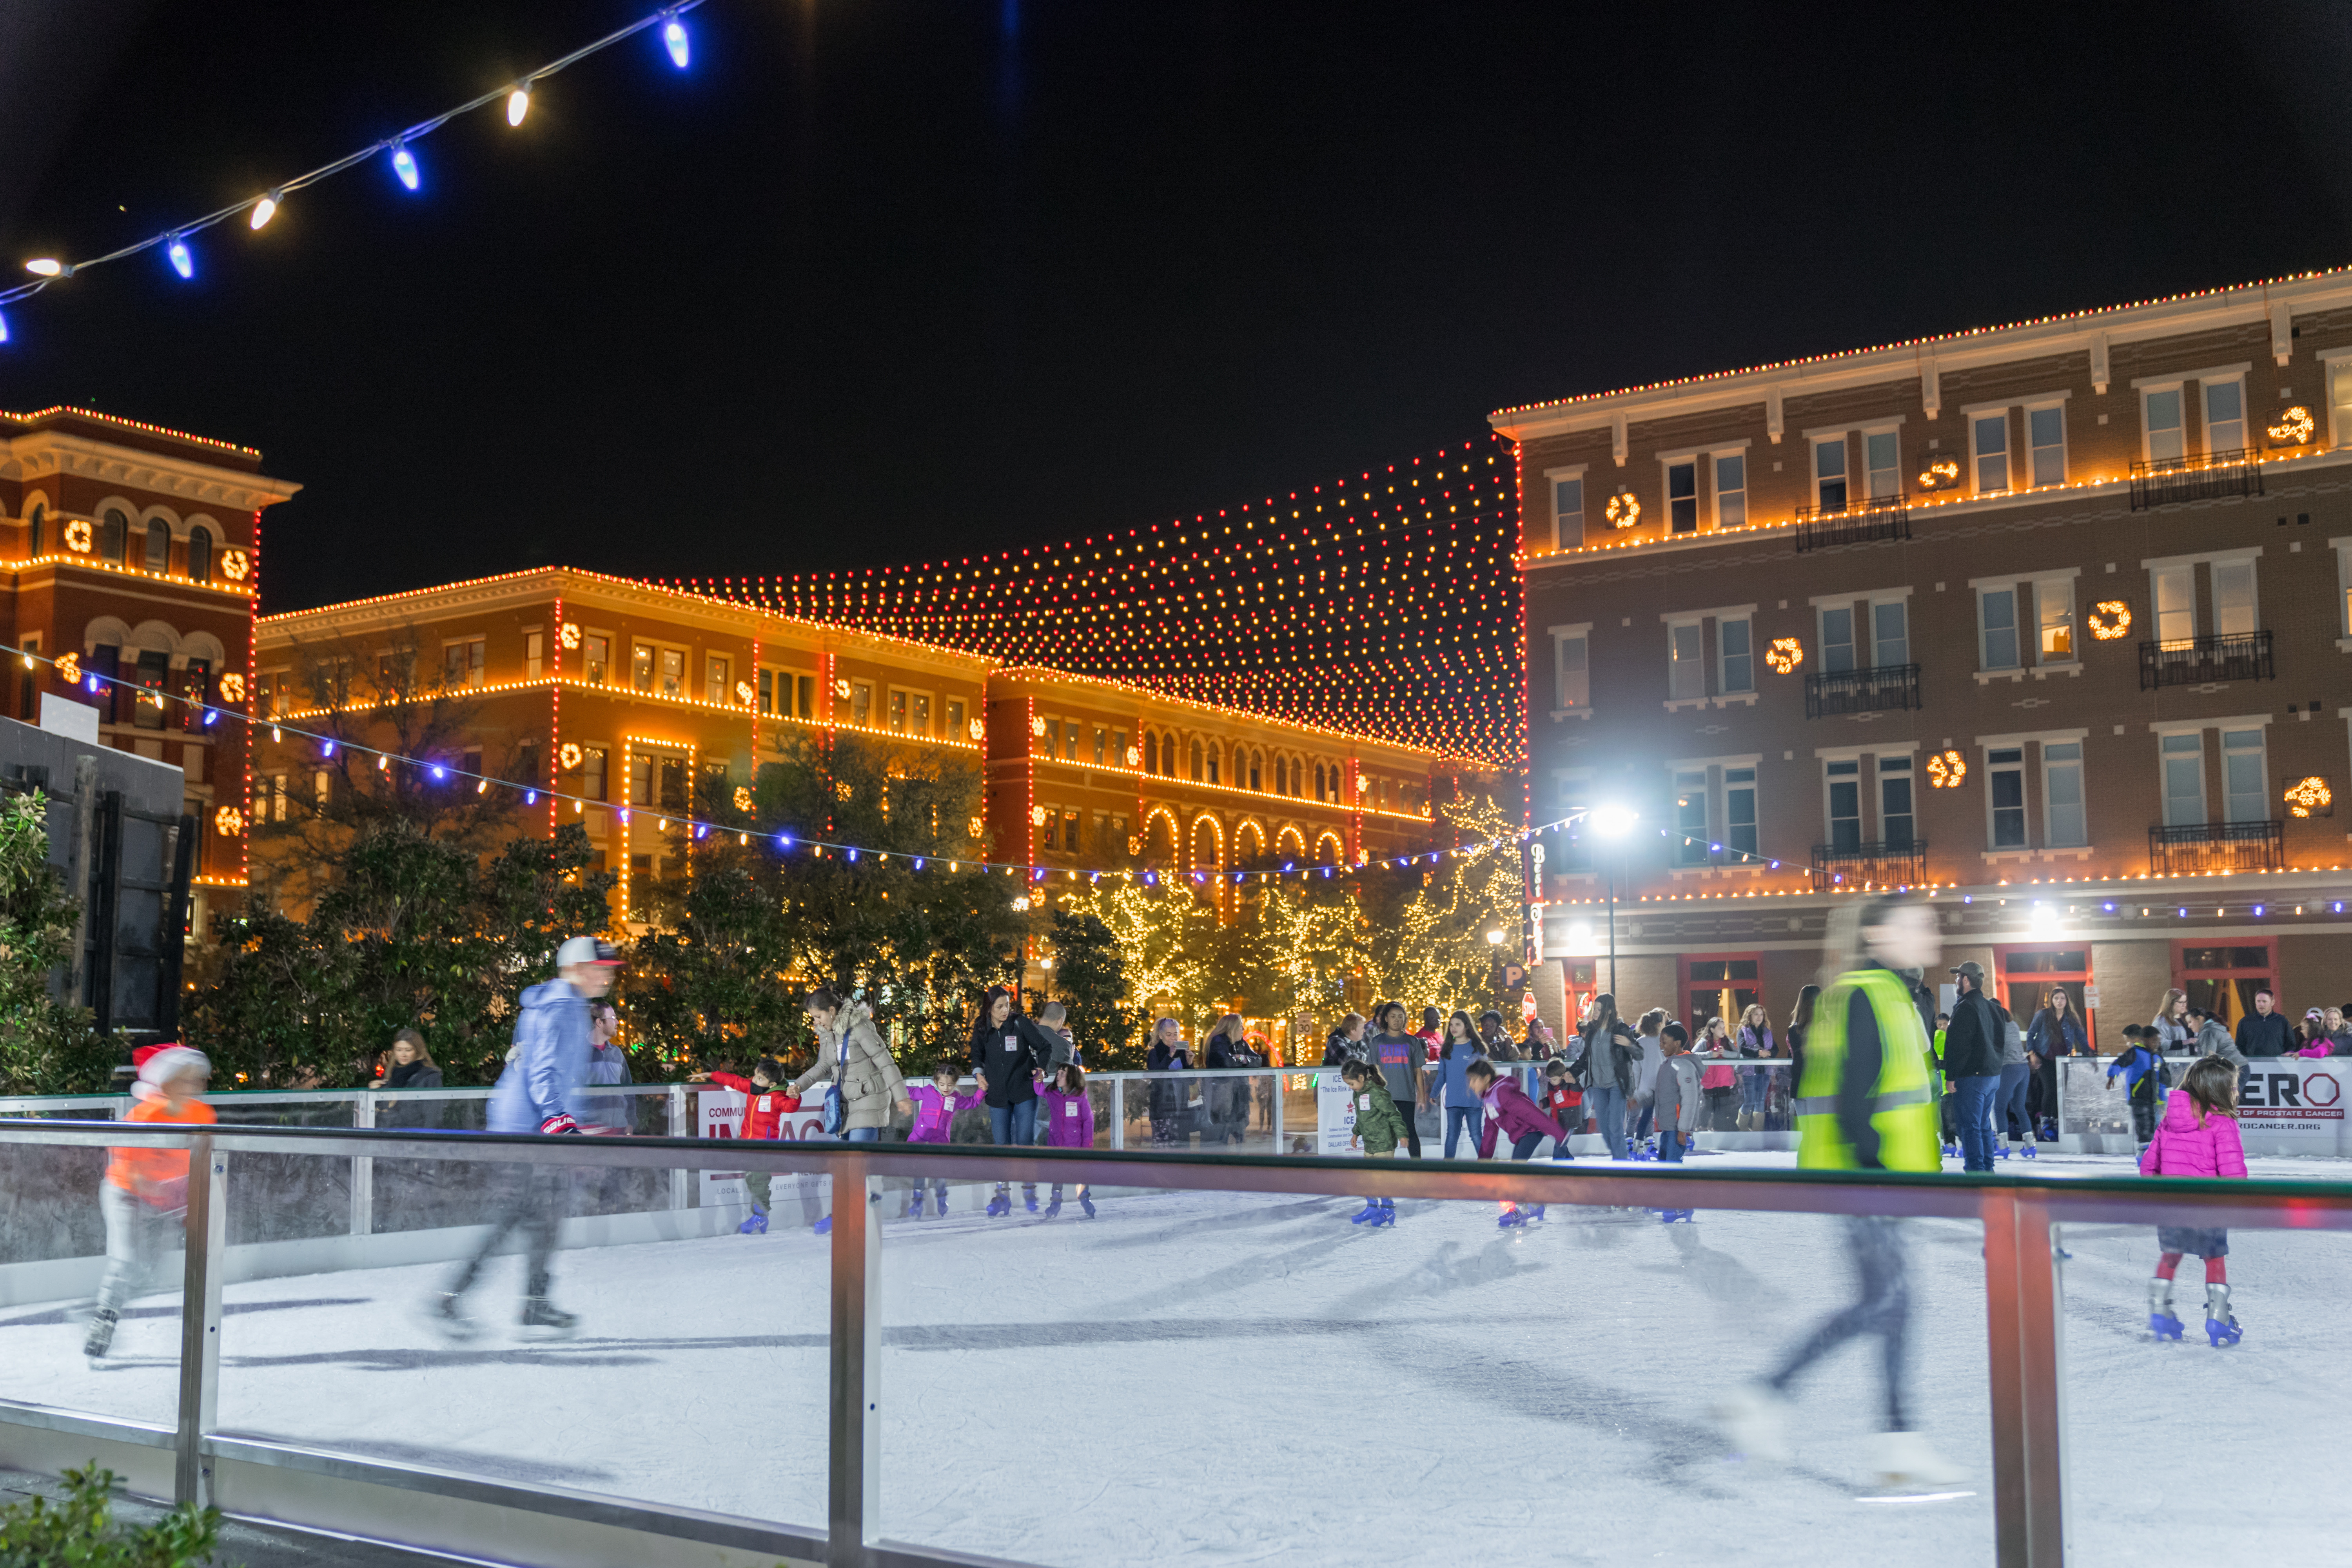 People participate in Christmas In The Square by skating on the skate rink.